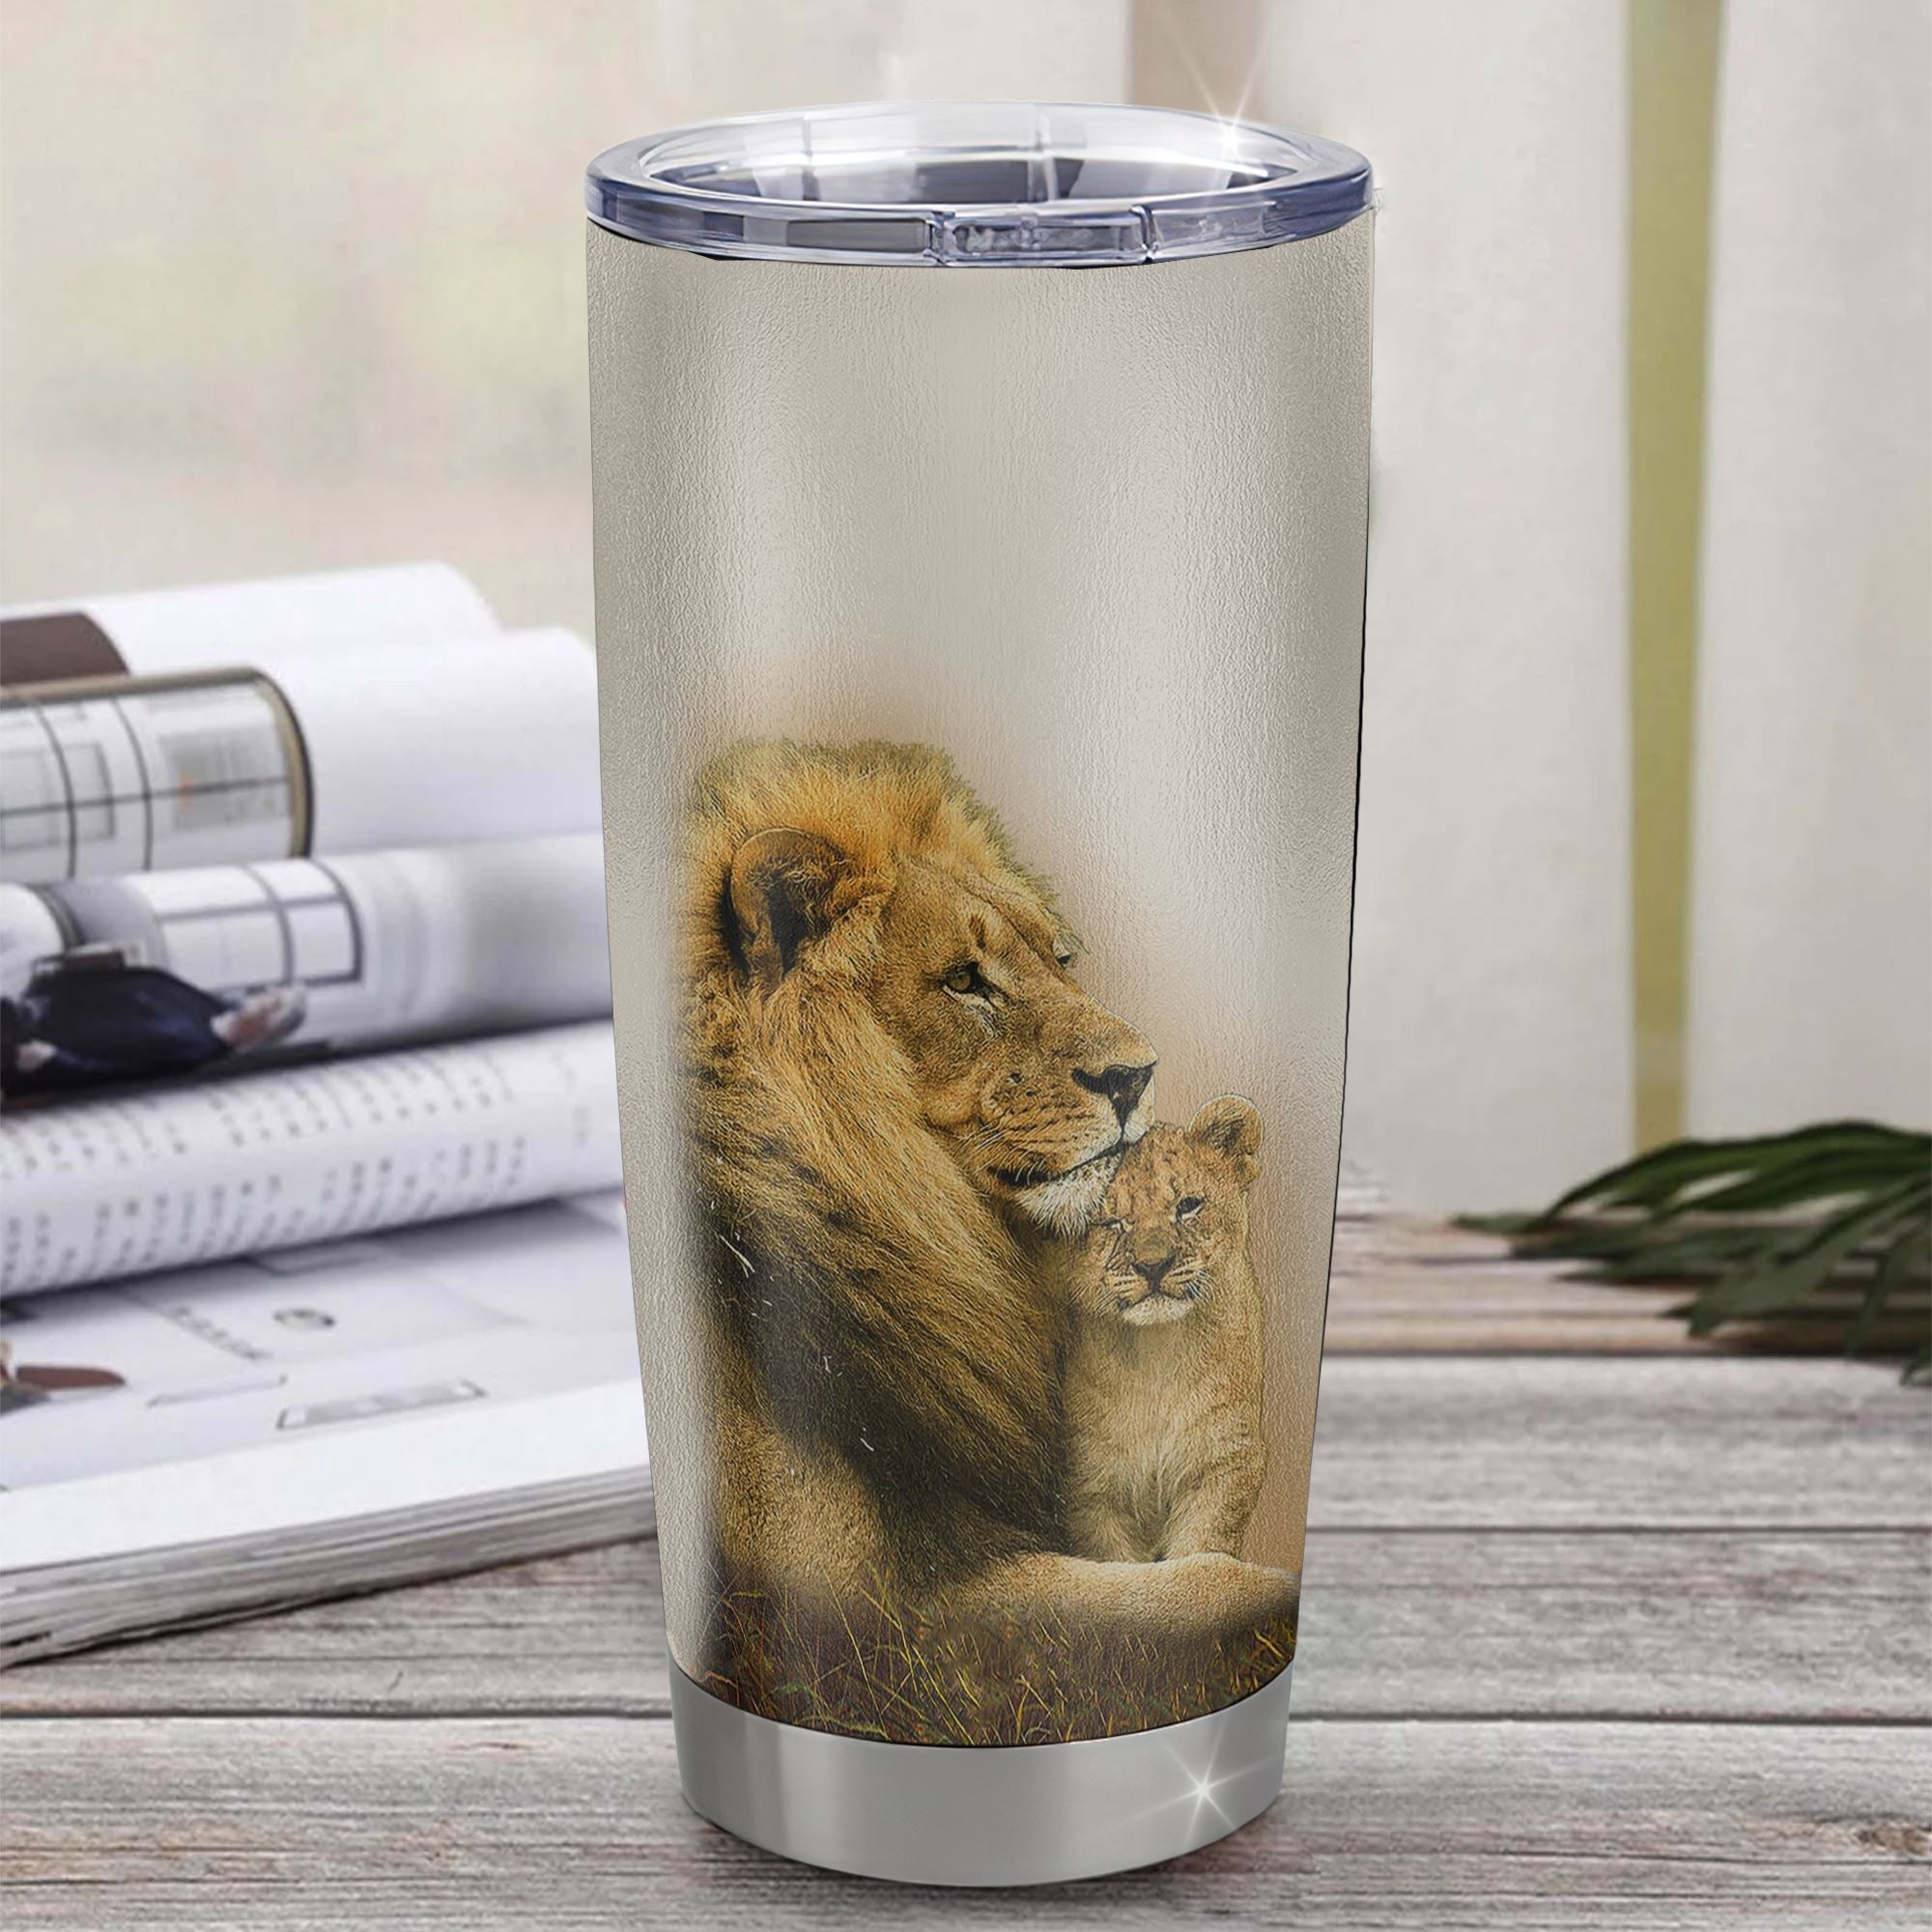 Personalized_To_My_Niece_Tumbler_From_Uncle_Stainless_Steel_Cup_Lion_Never_Feel_That_You_Are_Alone_Great_Niece_Pendant_Birthday_Christmas_Travel_Mug_Tumbler_mockup_1.jpg